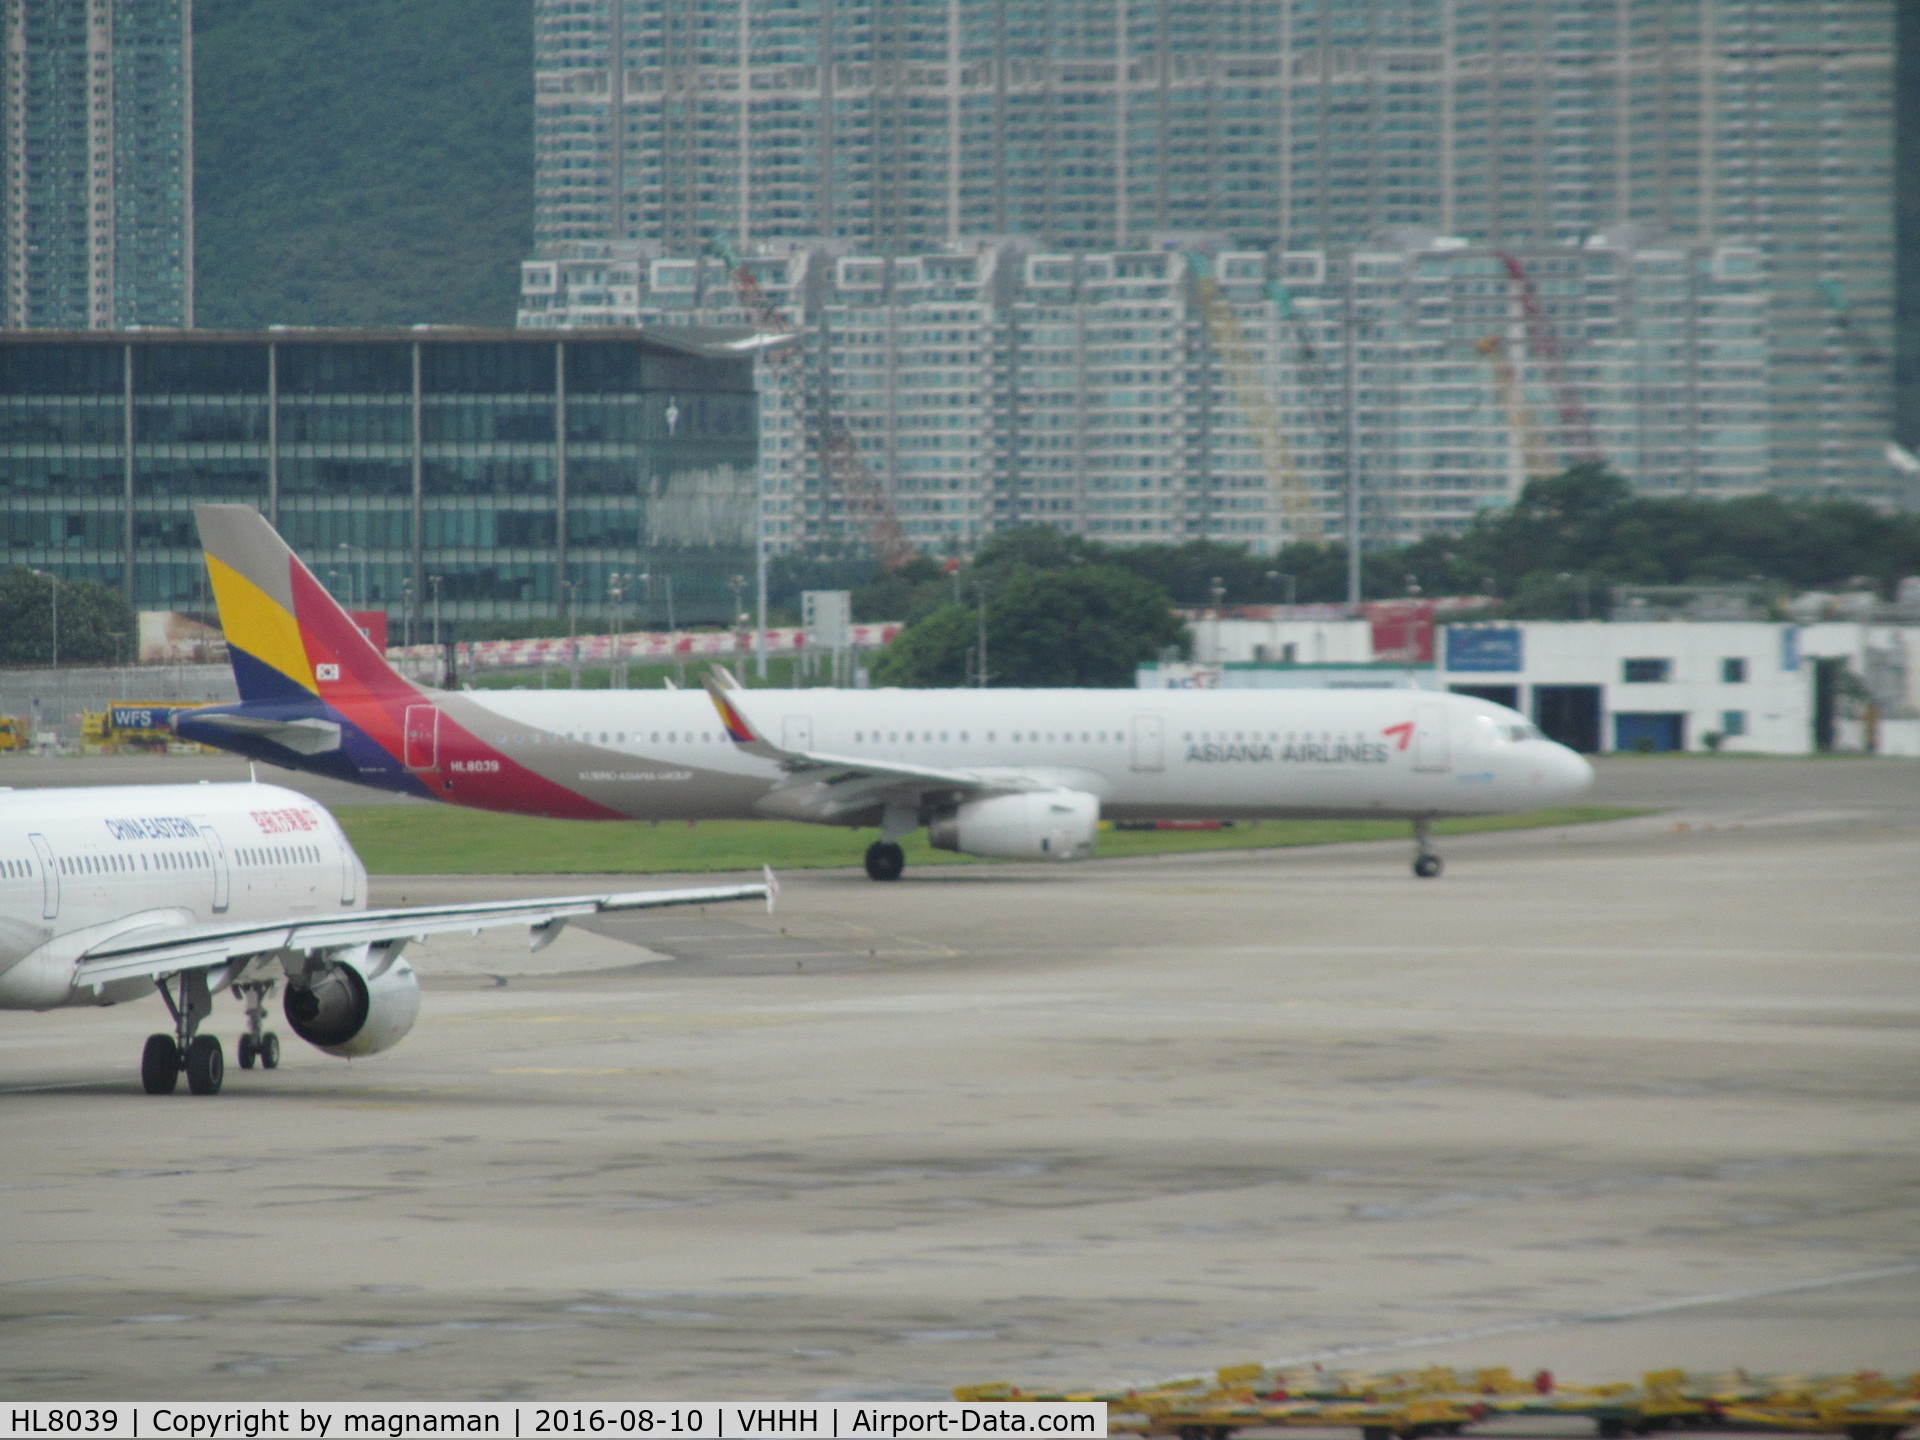 HL8039, Airbus A321-231 C/N 6796, about to depart hkg